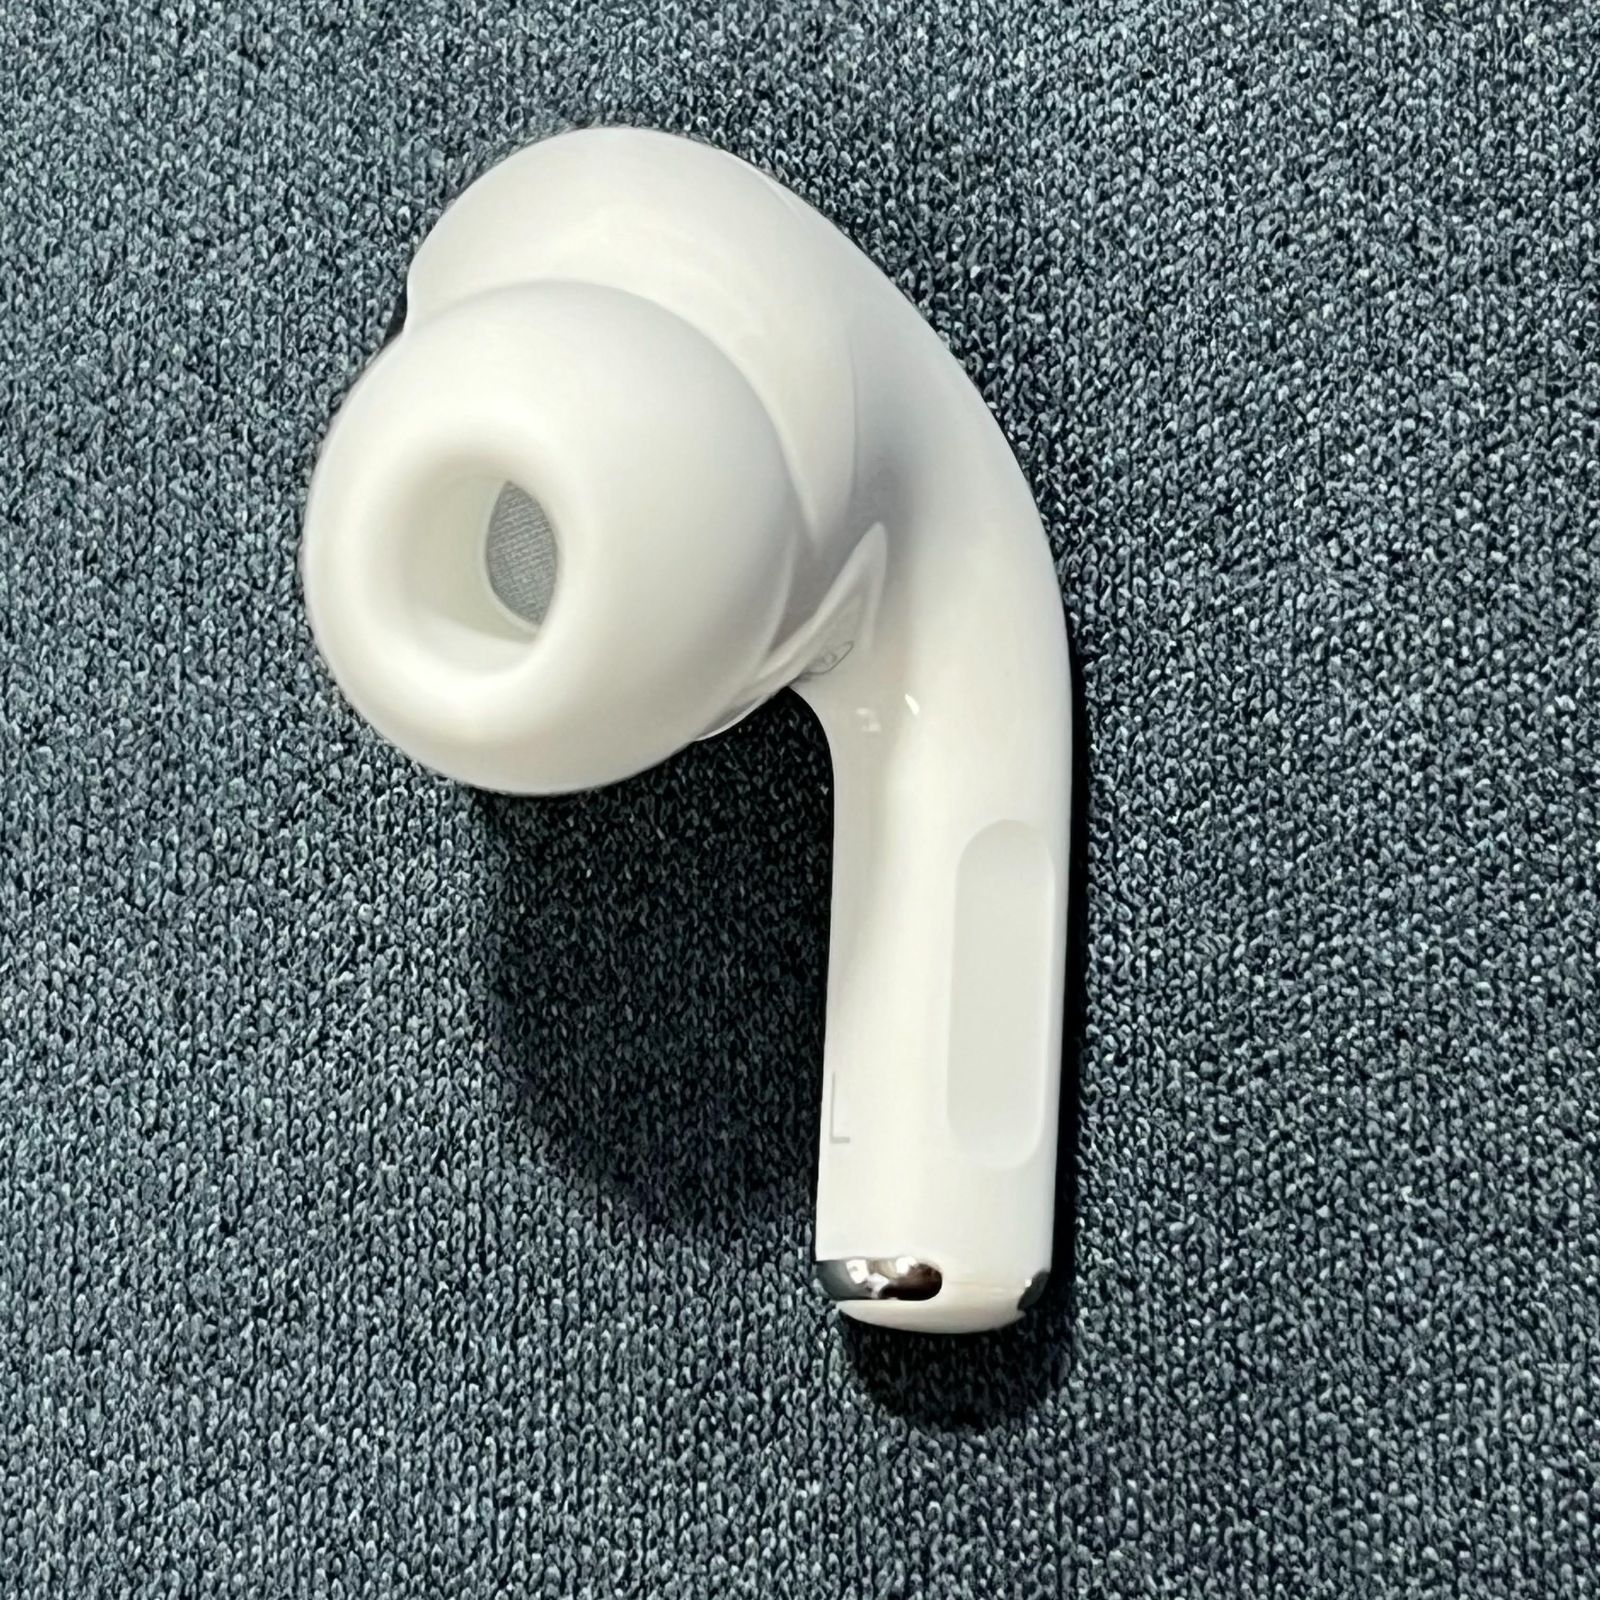 AirPods 右耳第一世代 バッテリー新品  エアーポッズ バッテリー交換済